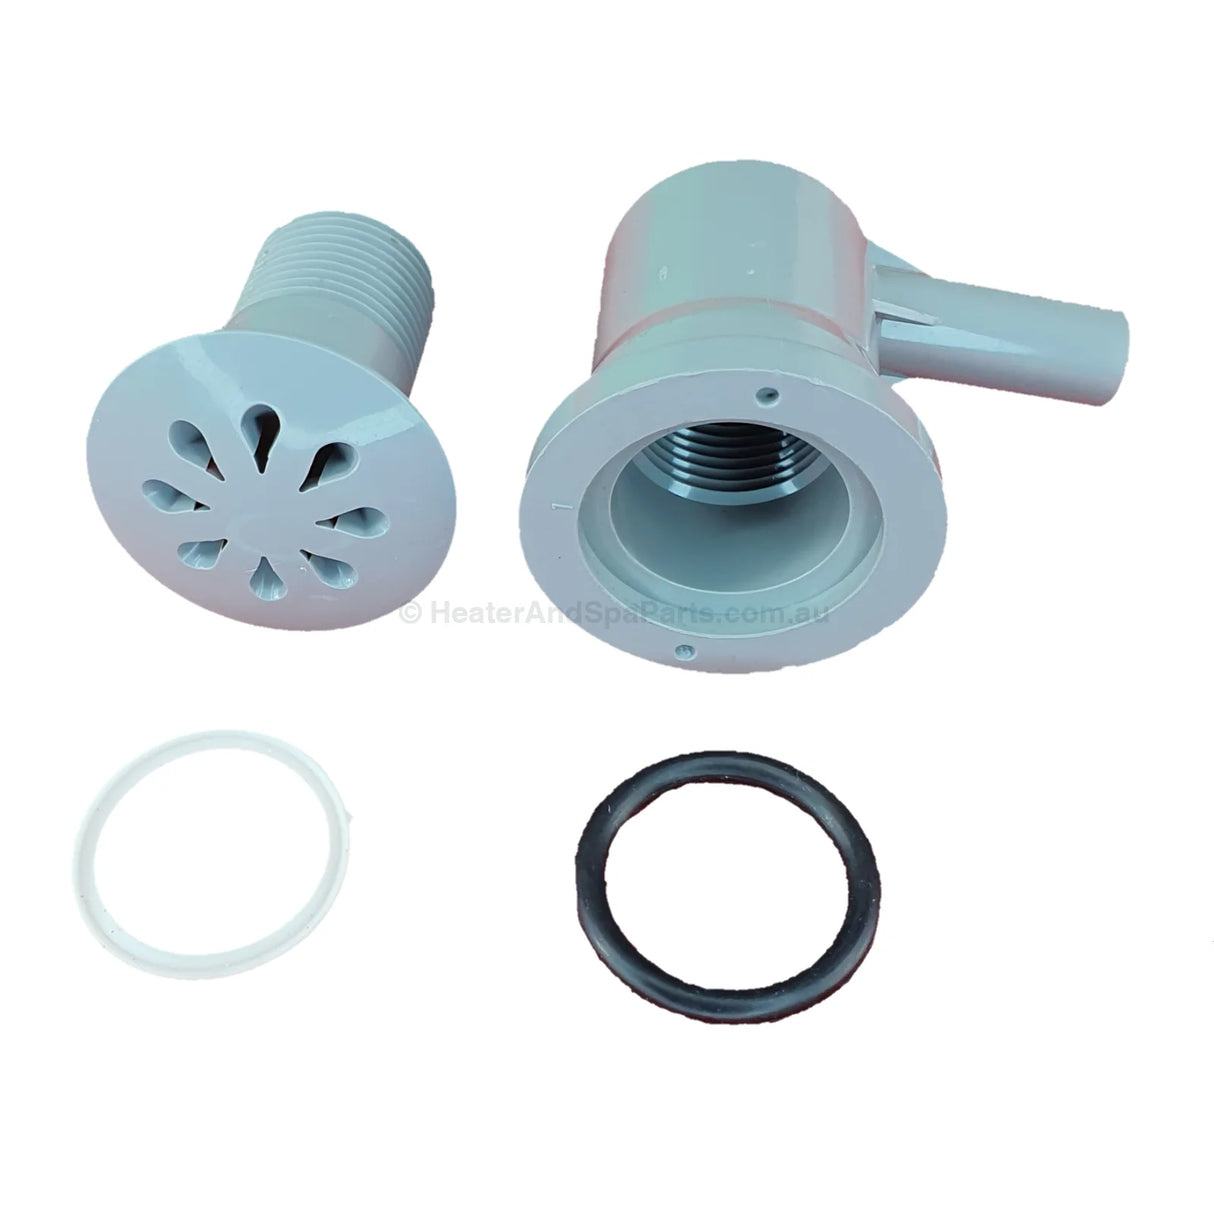 22mm x 39mm(D) Air Injector for Spas - Grey - Heater and Spa Parts